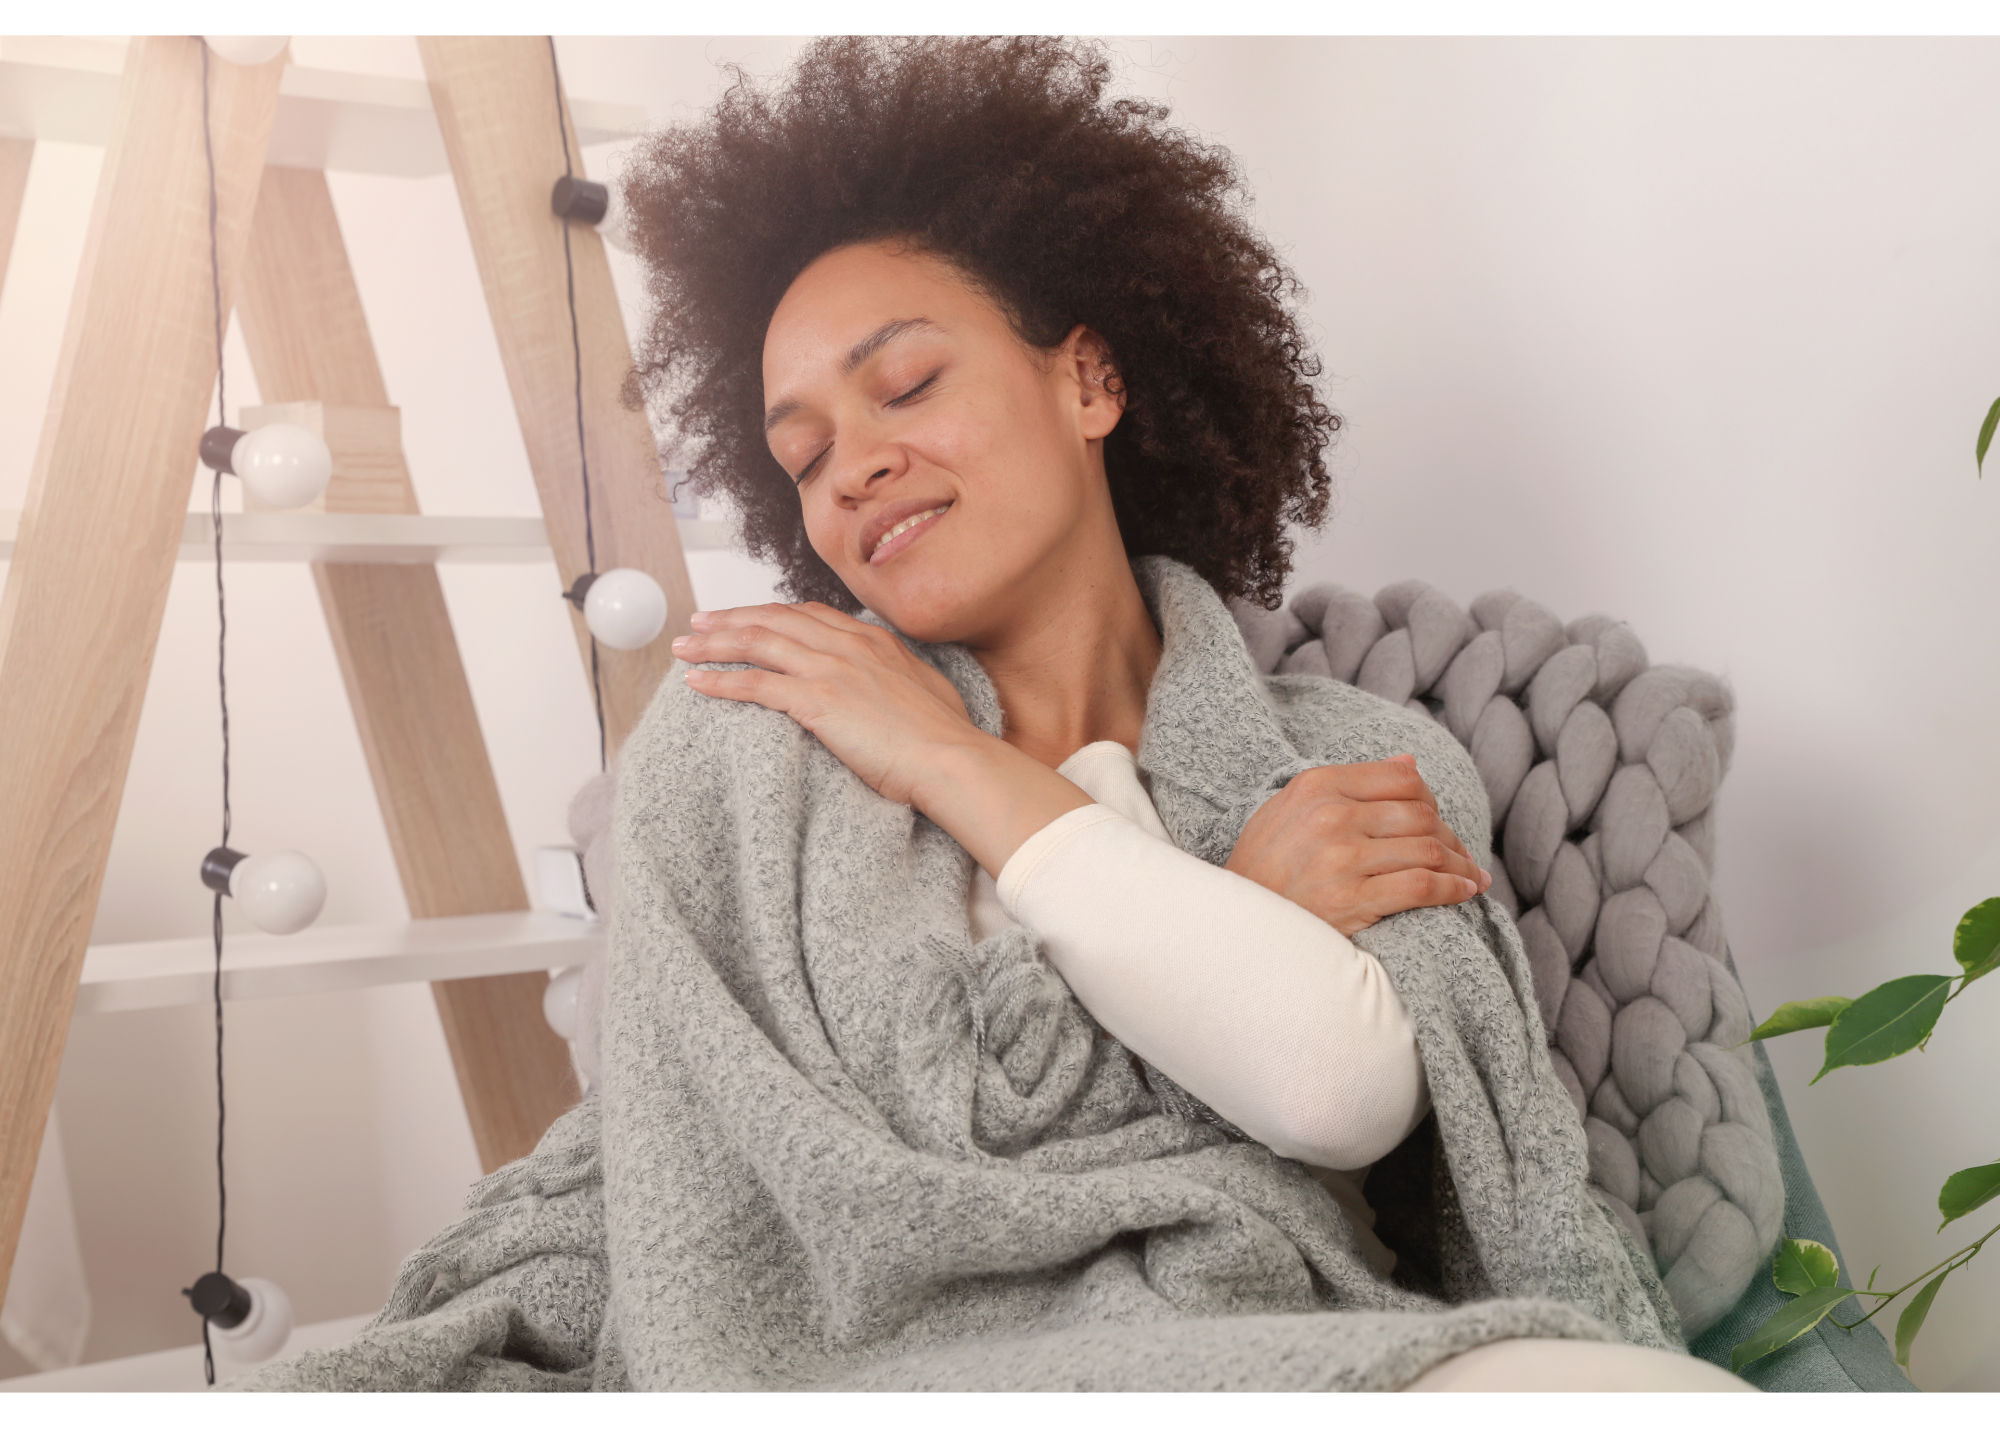 A woman smiles while wrapped in a blanket. Learn how a therapist in New Bern, NC can support you in cultivating self-care. Search “New Bern therapist” for support with mental wellness in North Carolina and more!